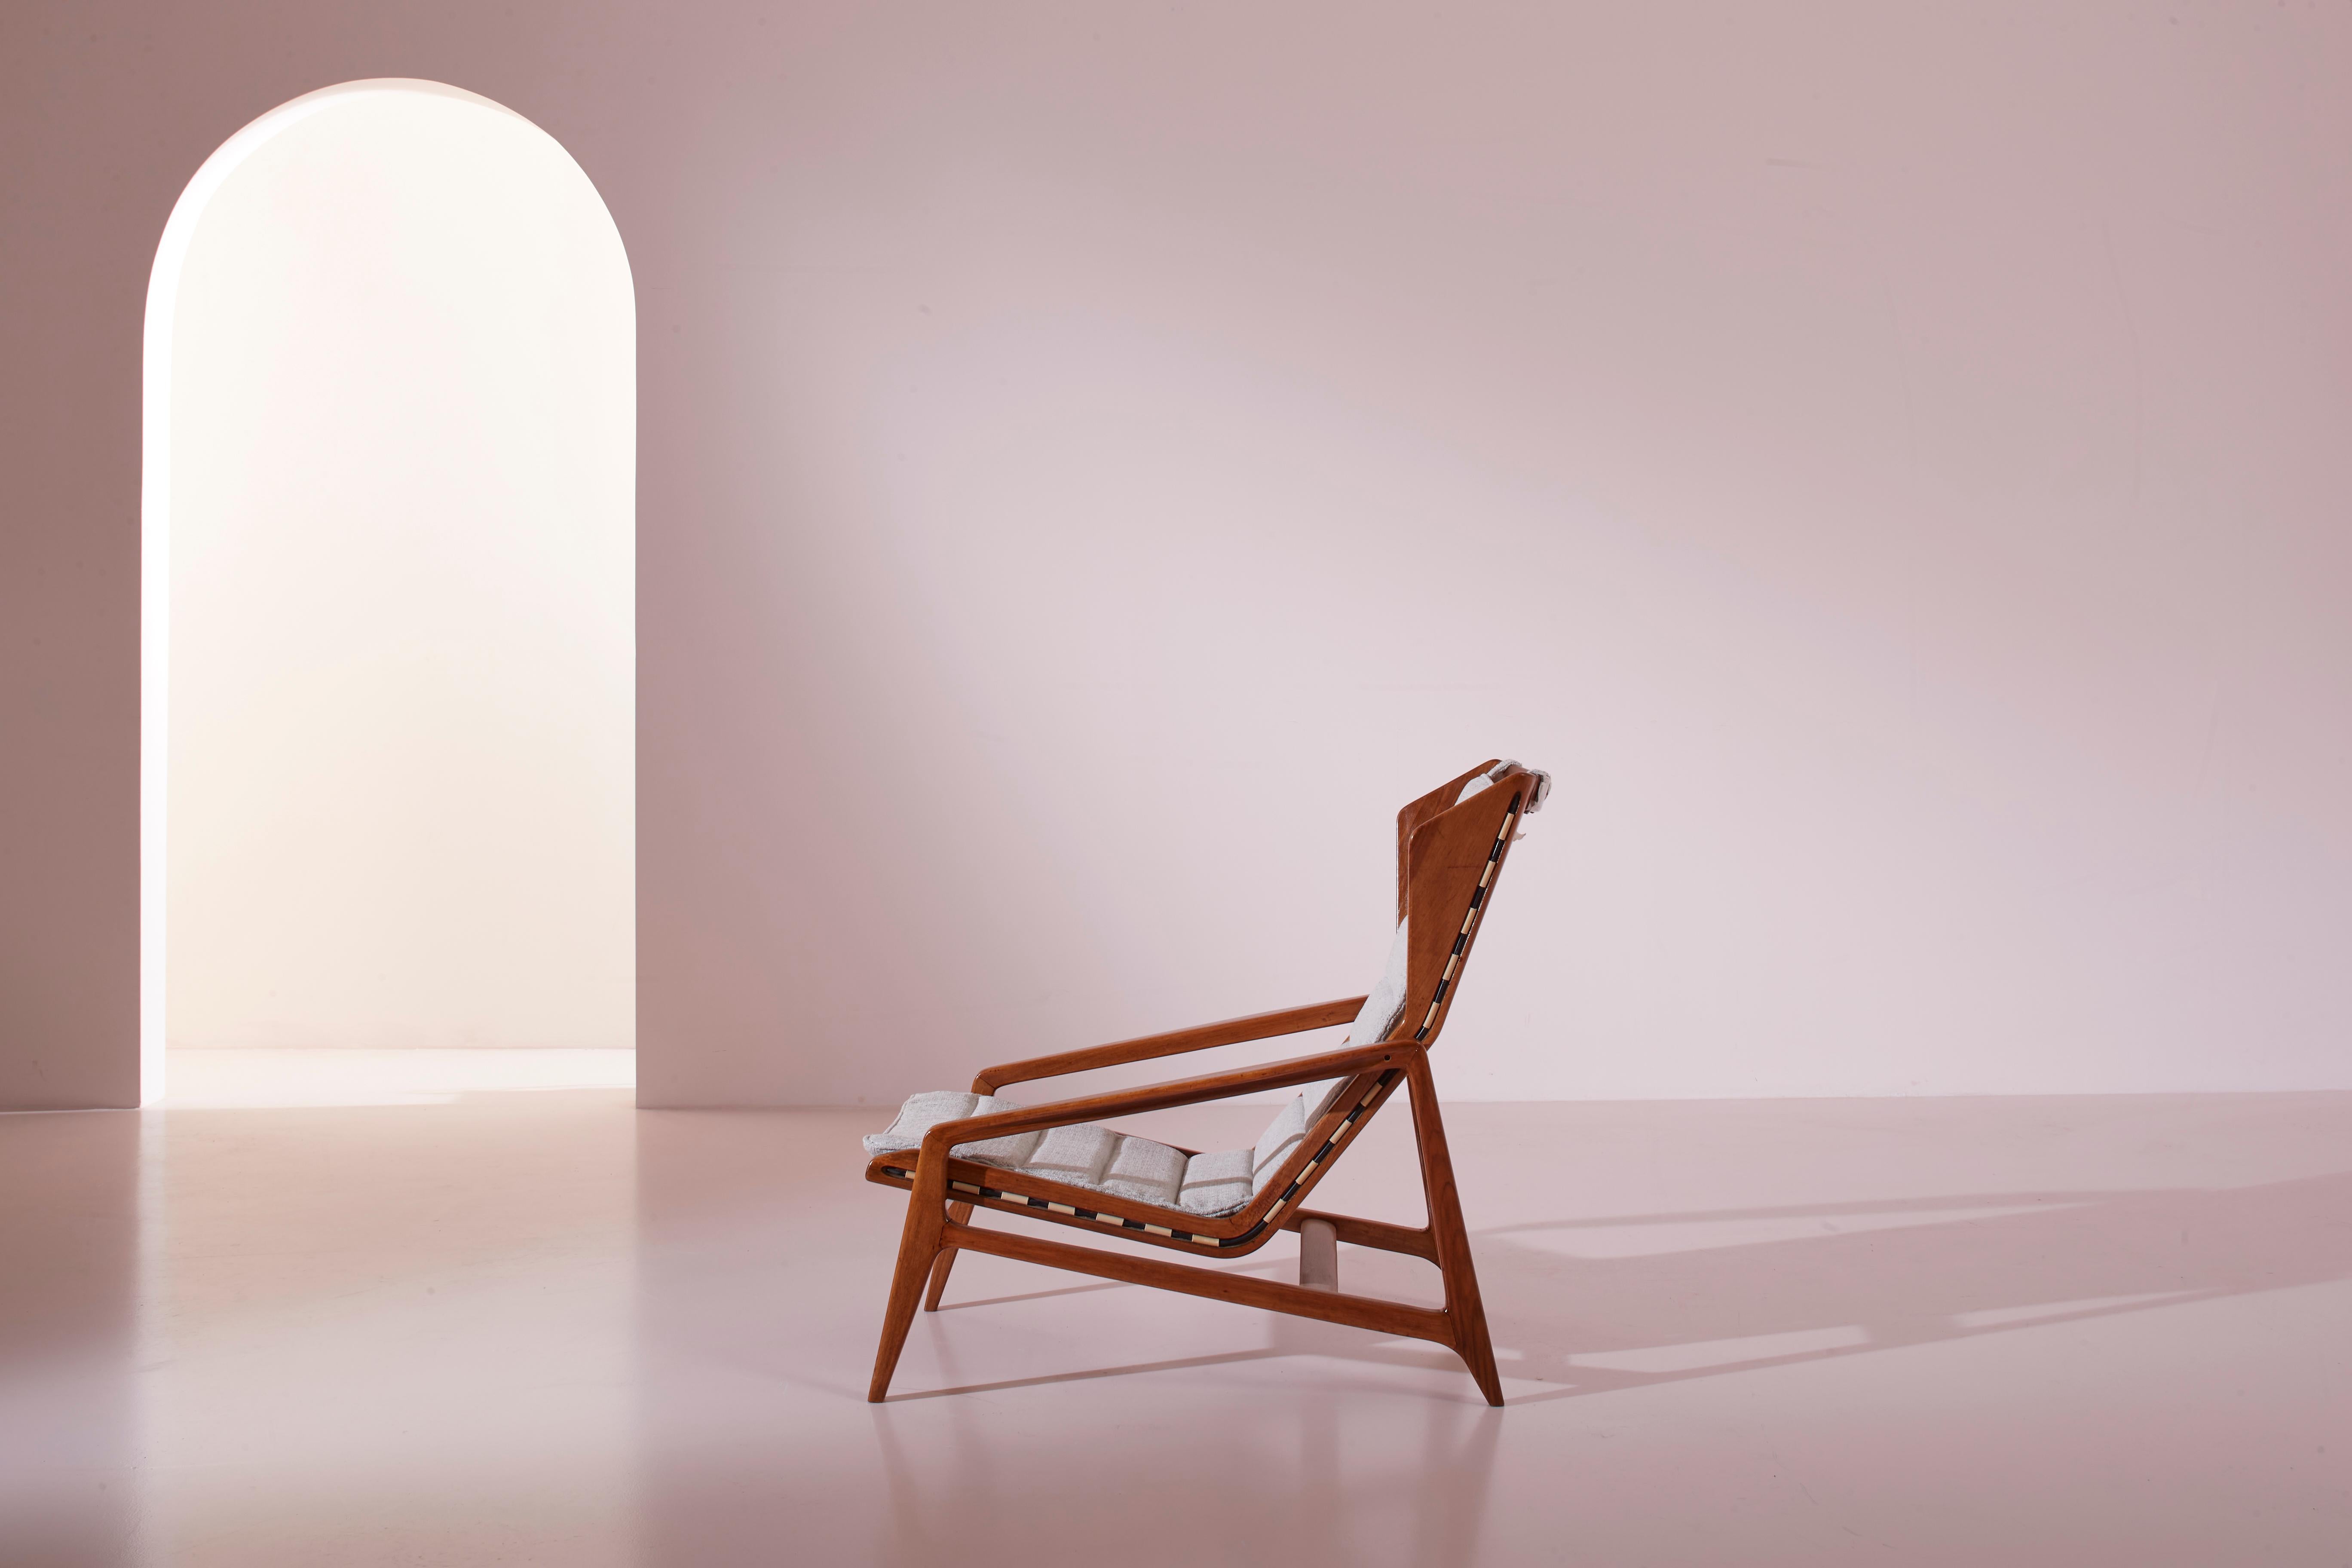 A rare armchair Model 811, with a walnut structure and rubber bands, designed by Gio Ponti and produced in Italy by Cassina in 1957.

There are artifacts from past decades that, due to their style and design, immediately evoke a specific historical